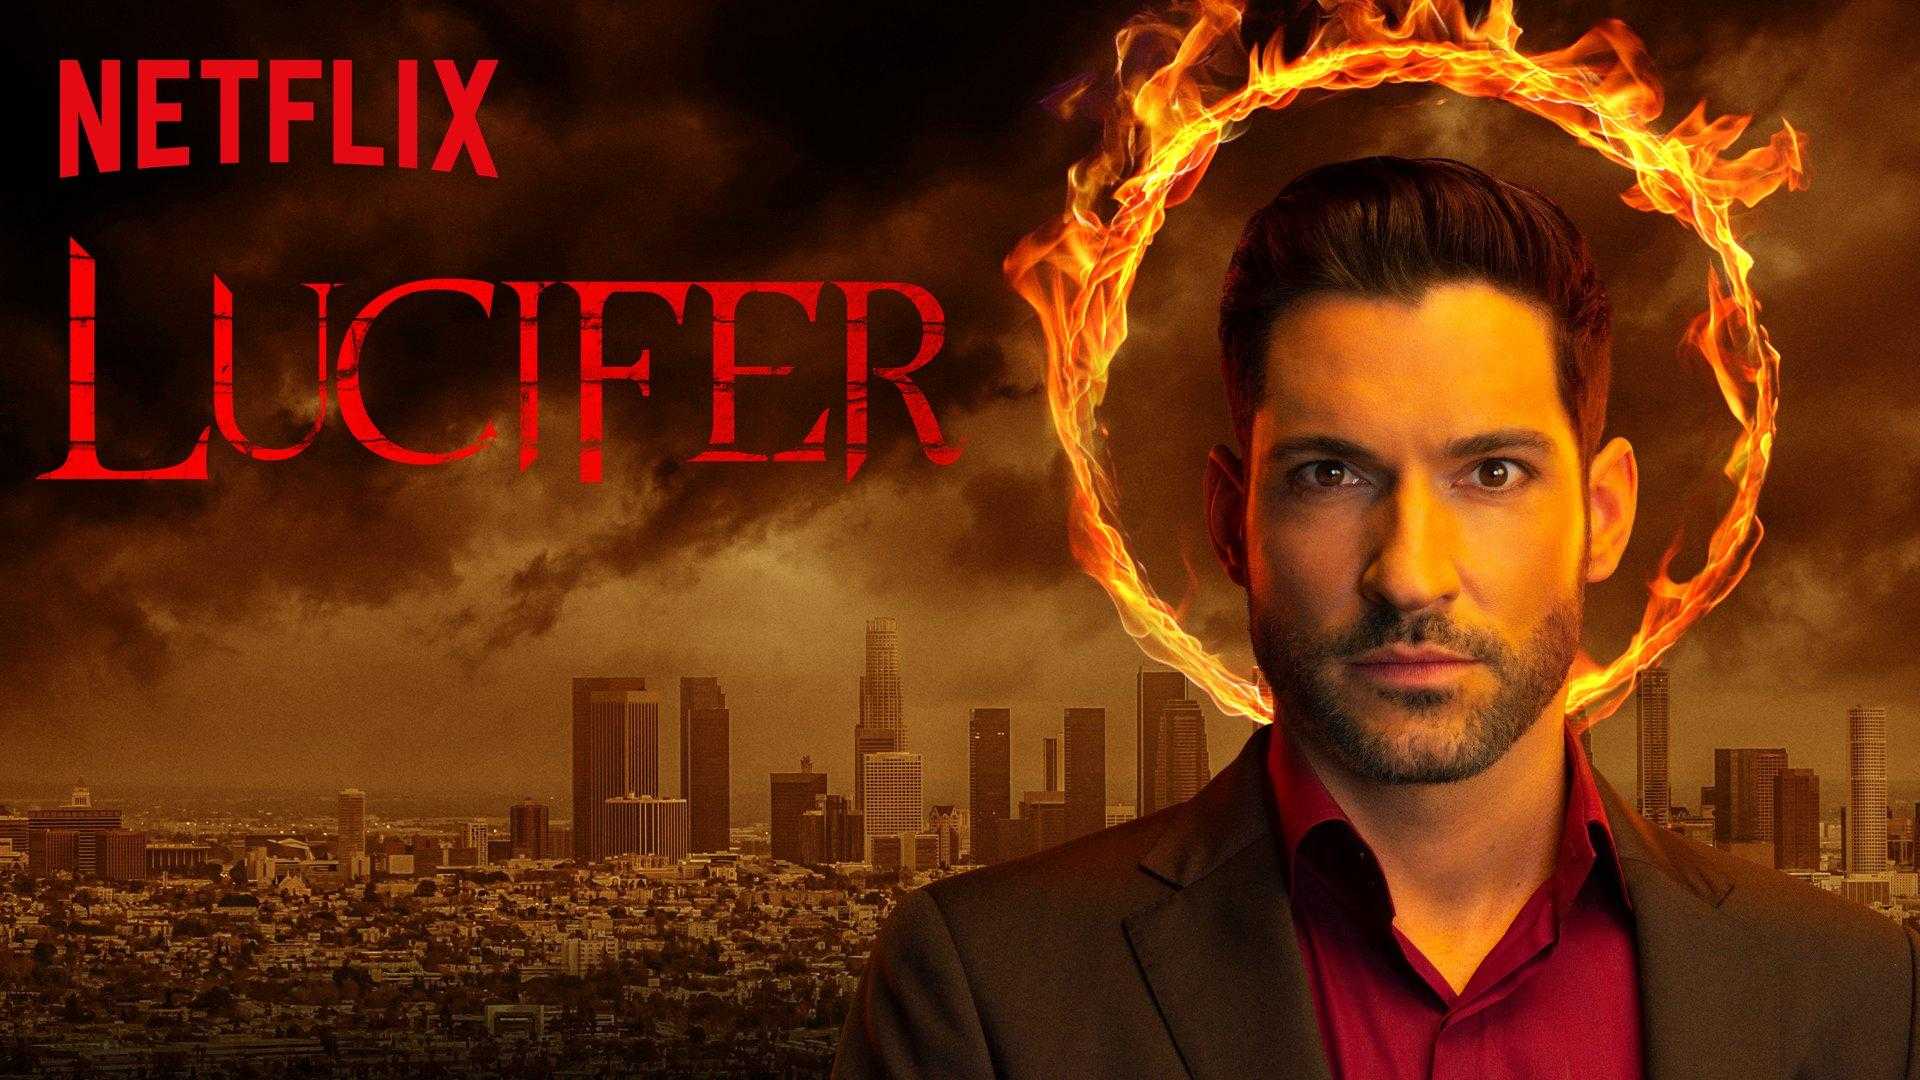 HD Lucifer Wallpaper Awesome